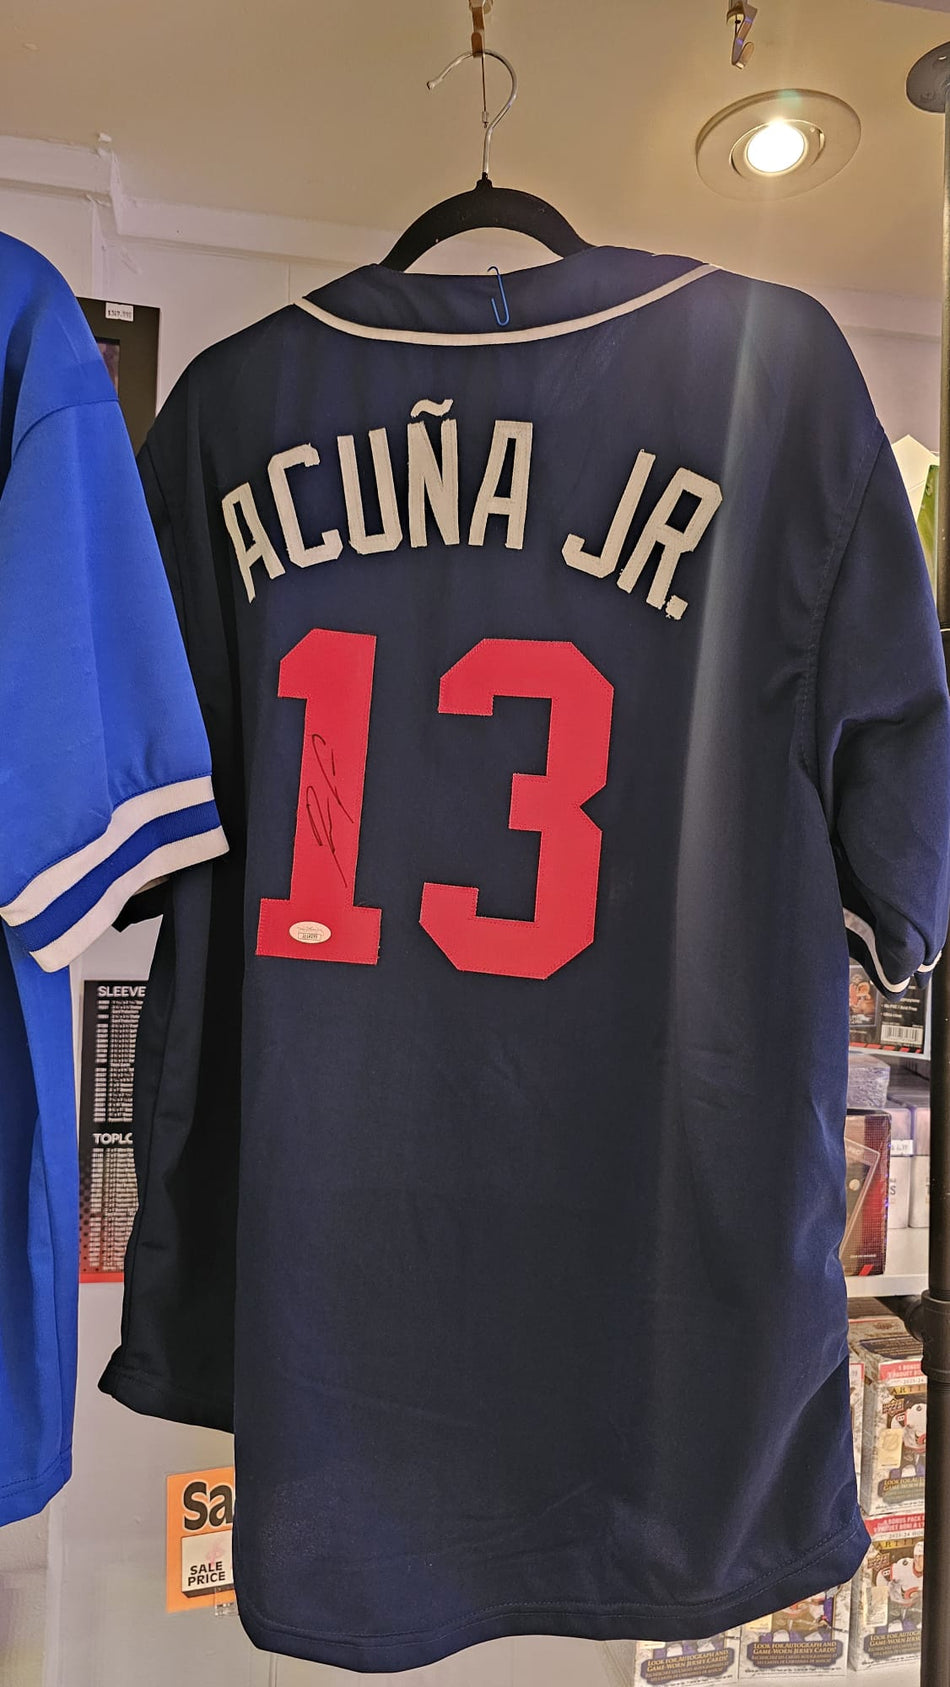 ACUNA JR. SIGNED JERSEY